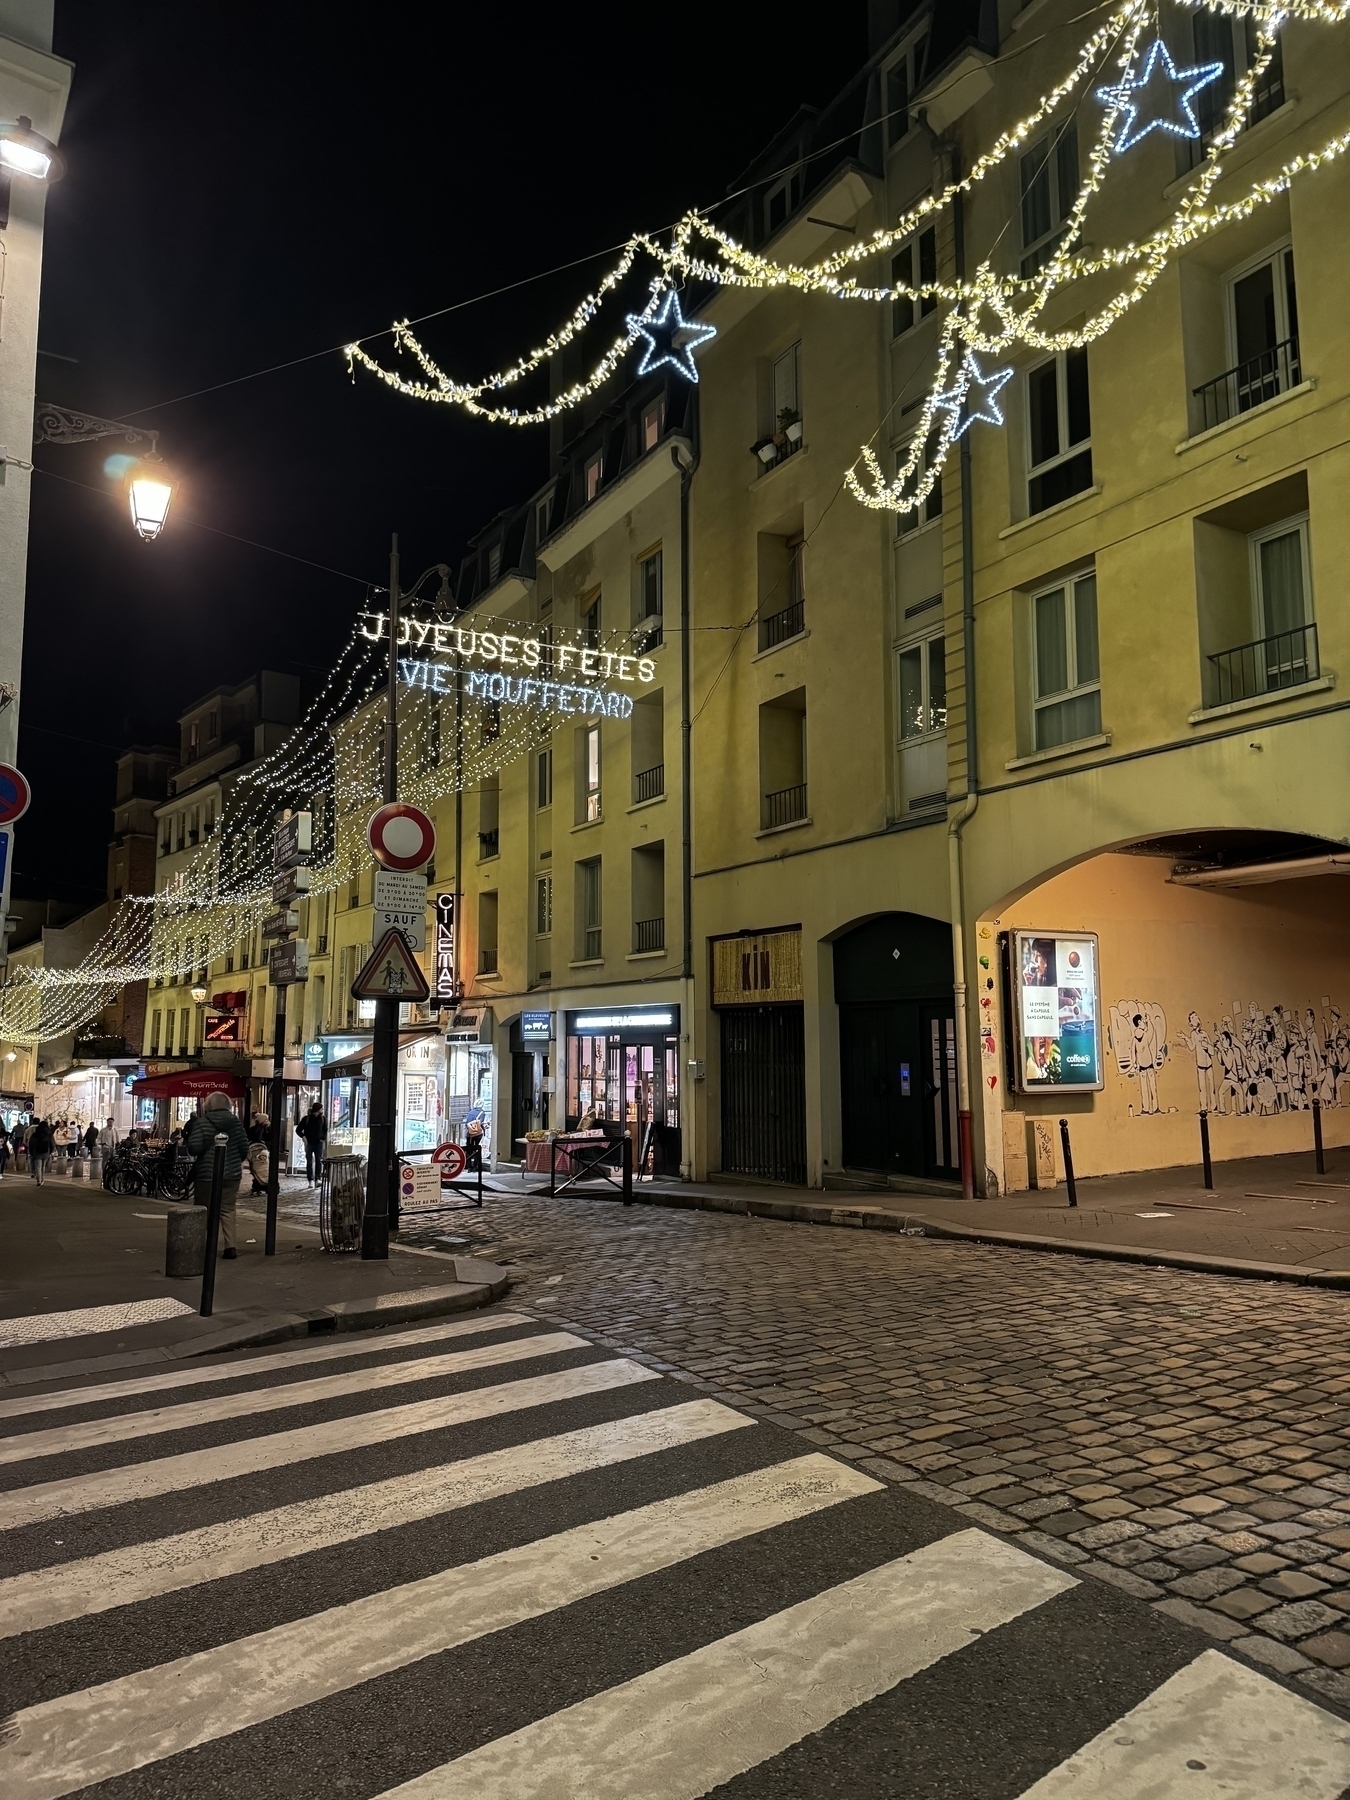 Parisian street corner with string lights hung above between the buildings.